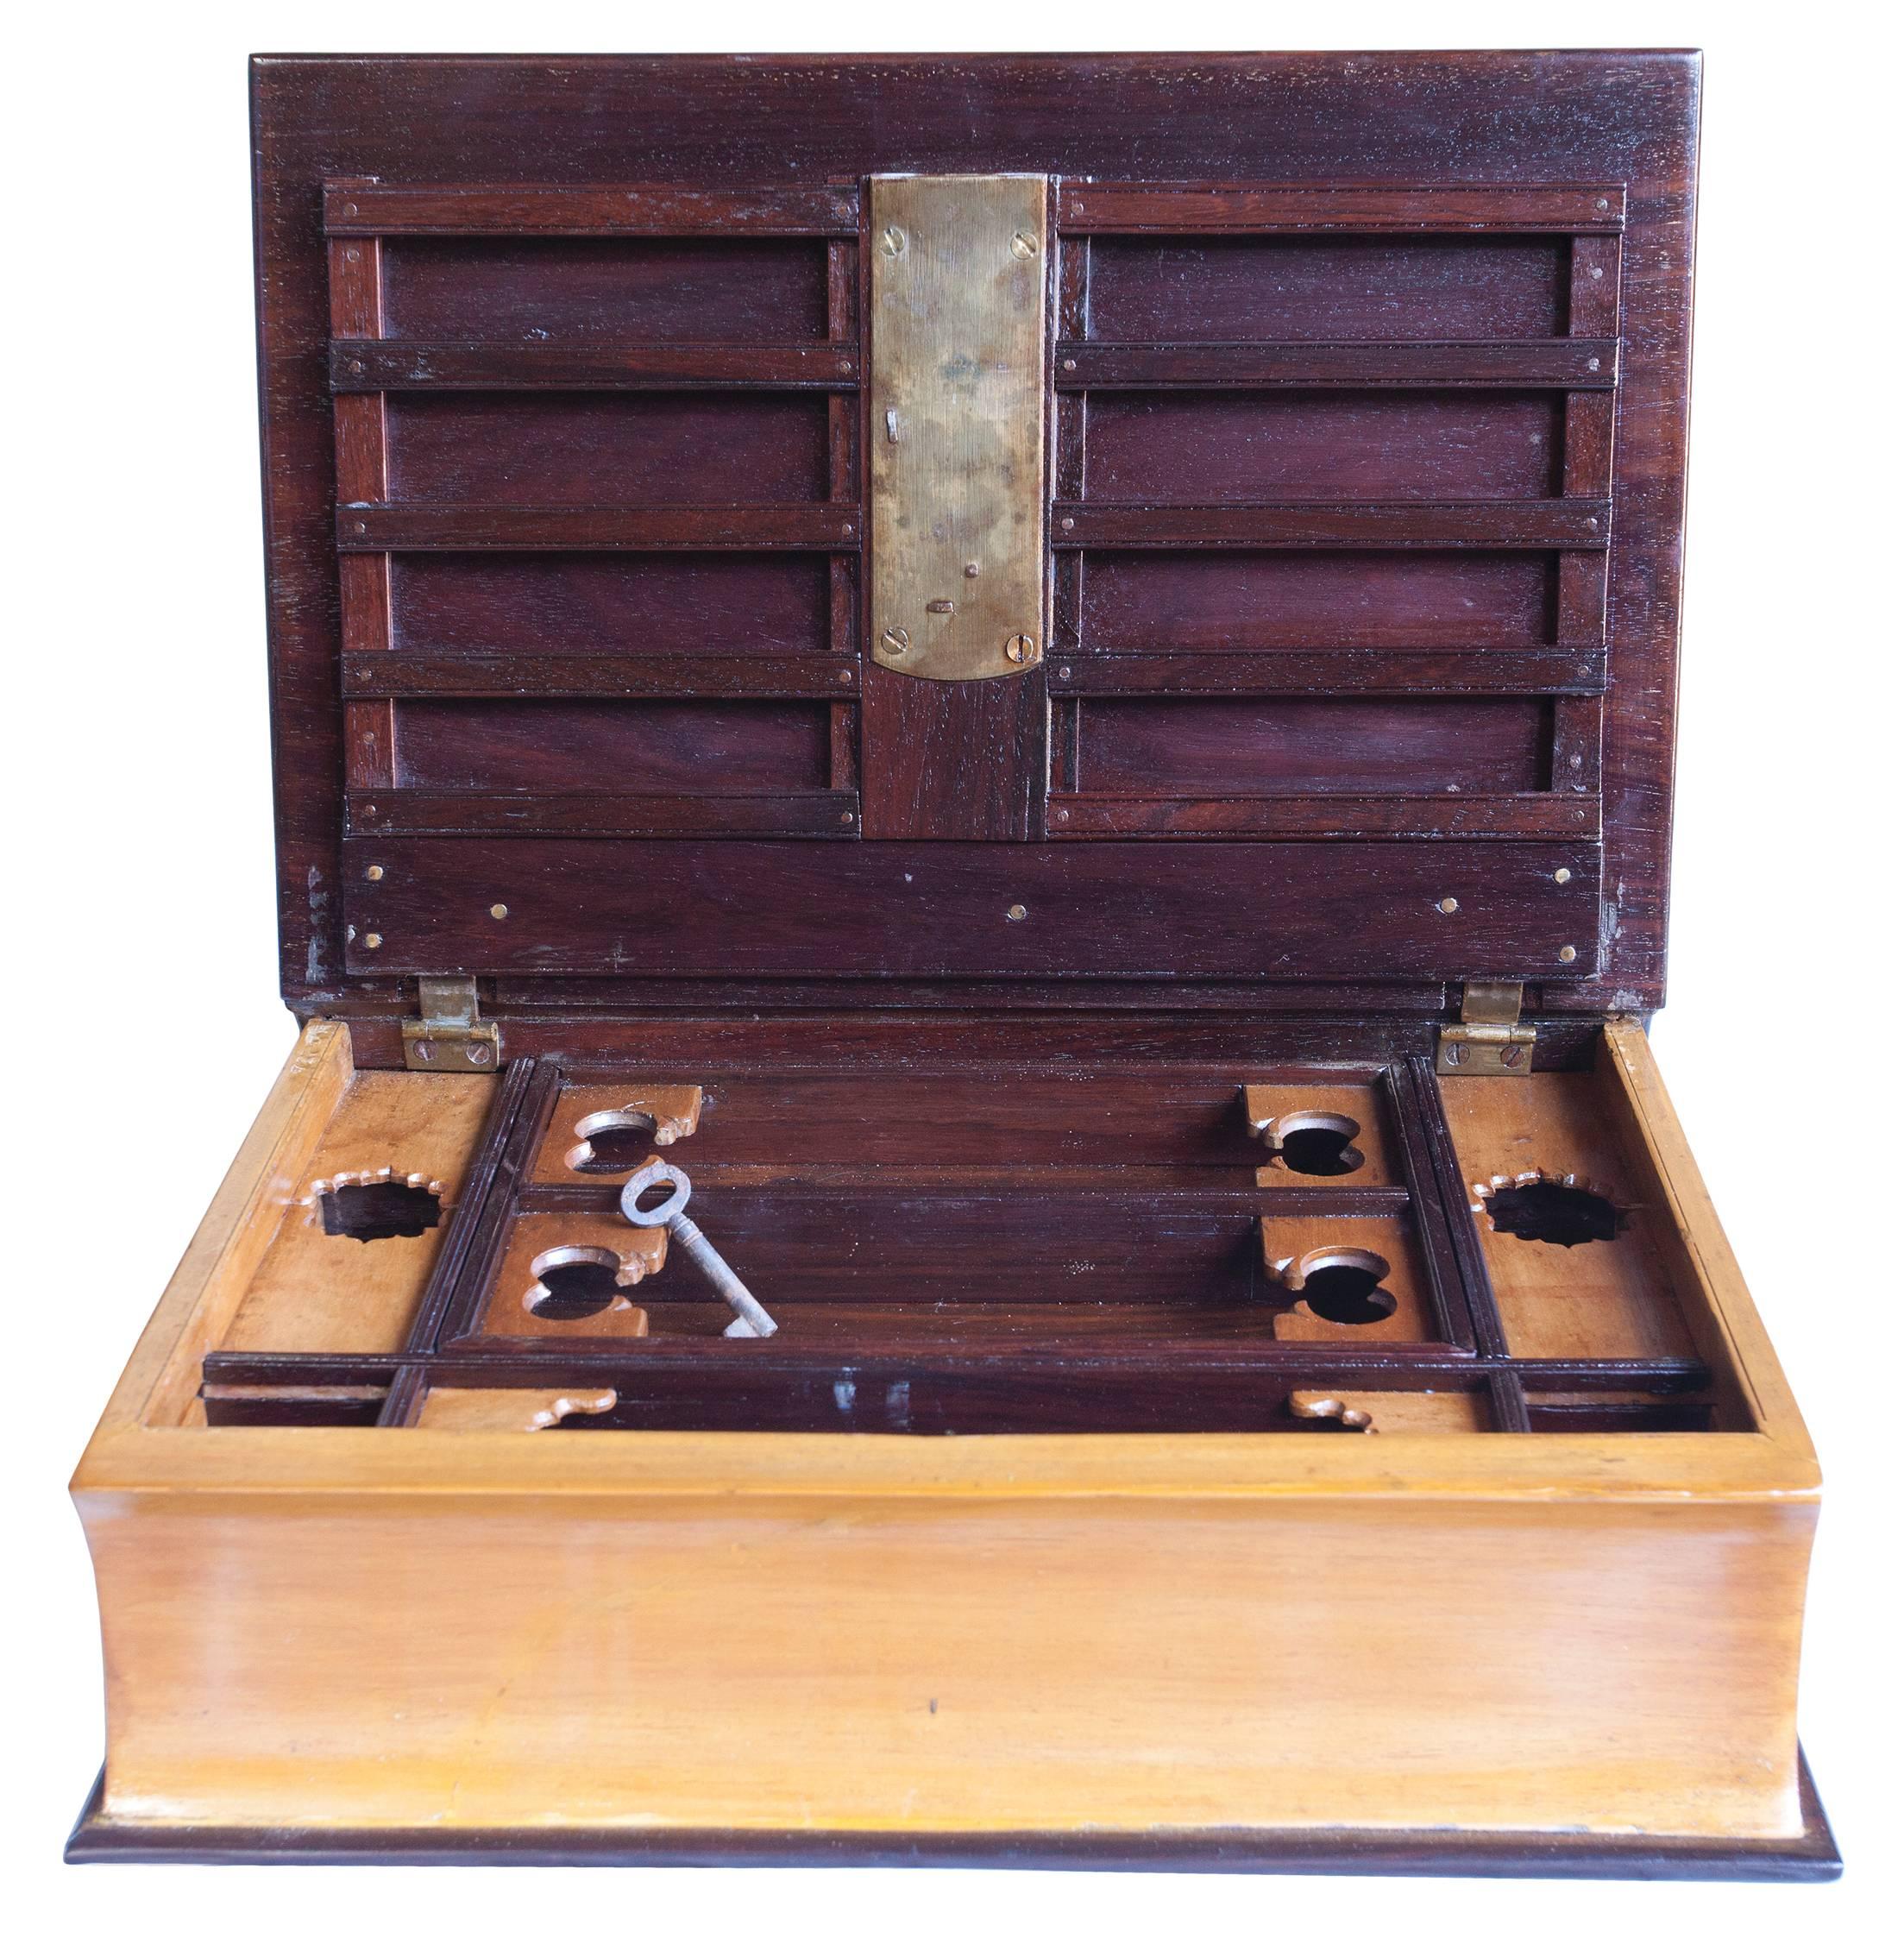 An early 1900s rosewood and satinwood book box with lock and key and intricate interior compartments. The interior tray lifts out for space underneath, documents and the like. Classy and discrete way to store and hide your valuables.